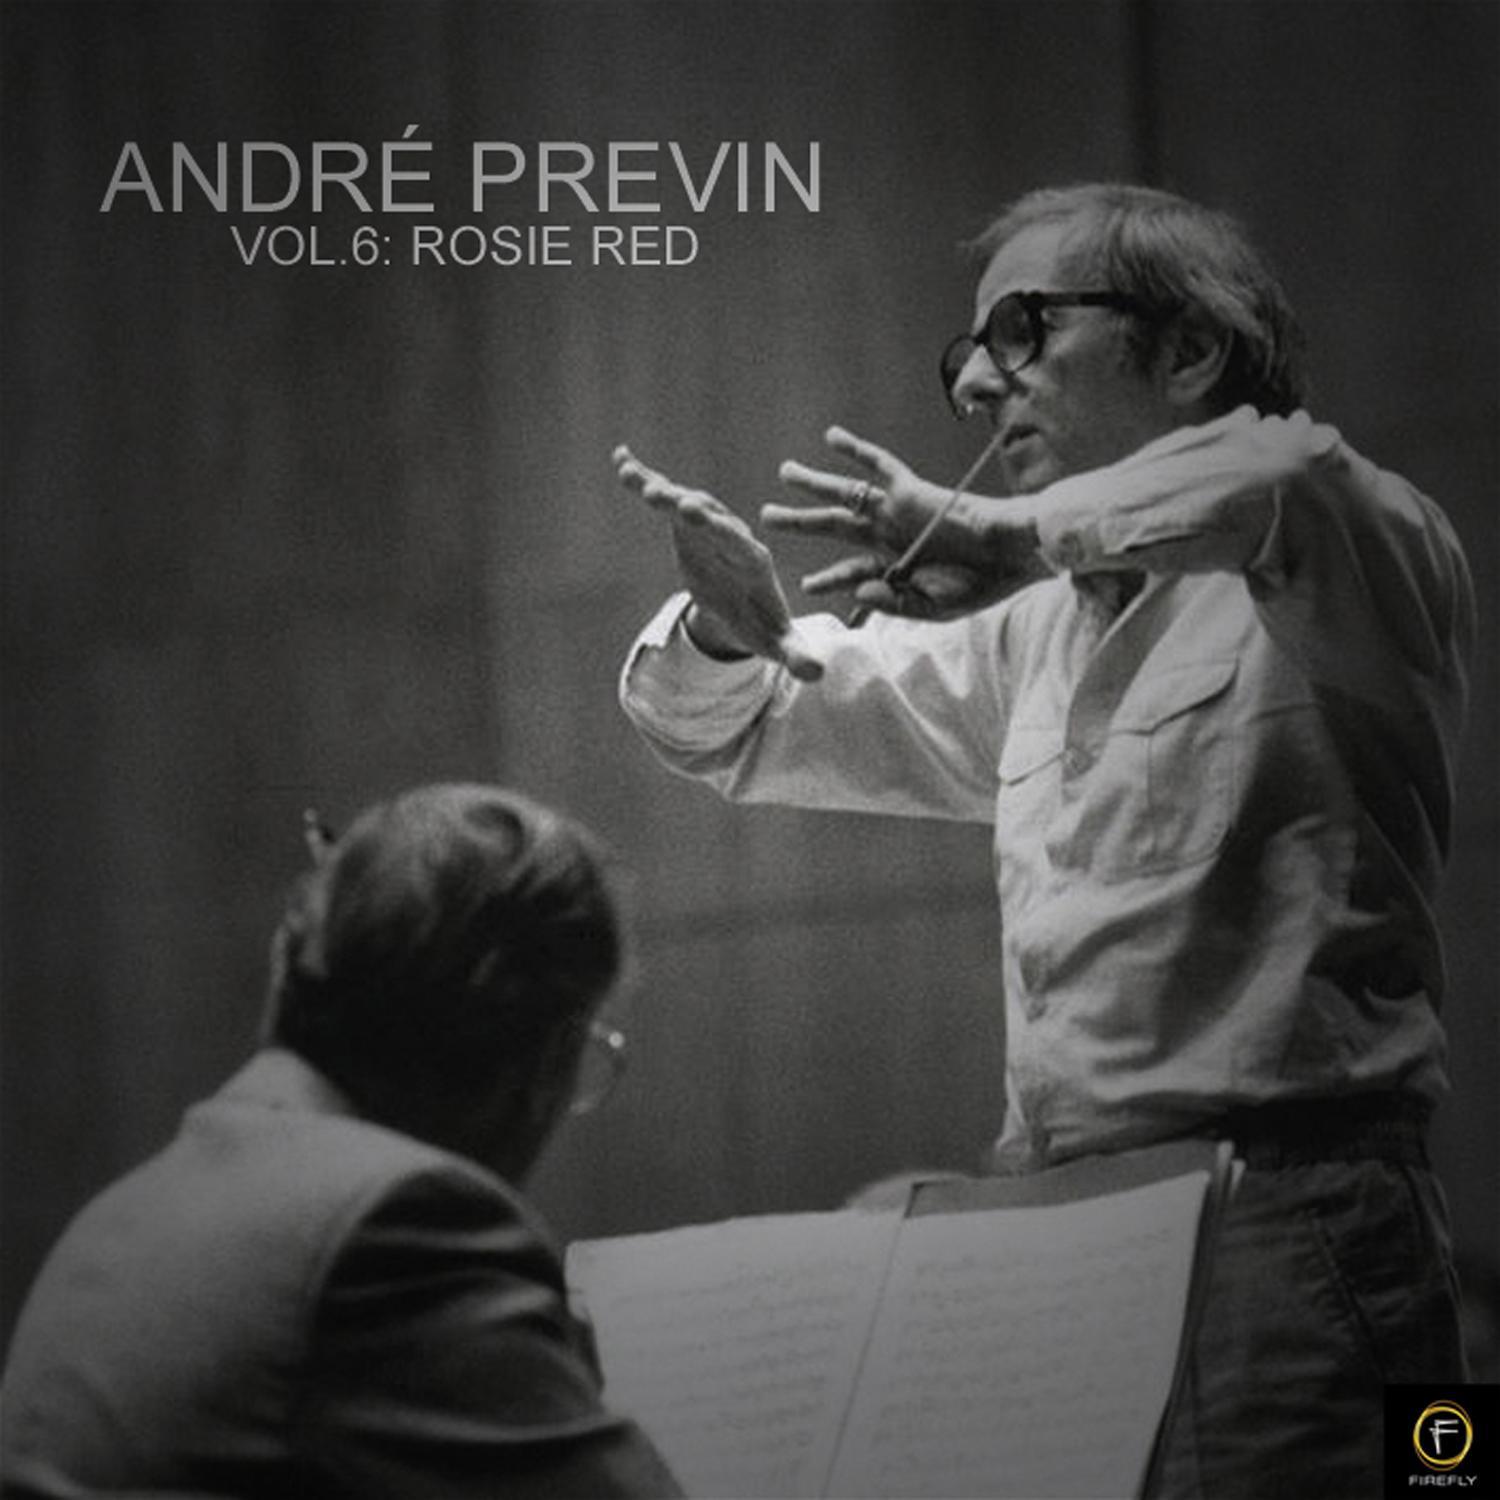 Andre Previn, Vol. 6: Rosie Red